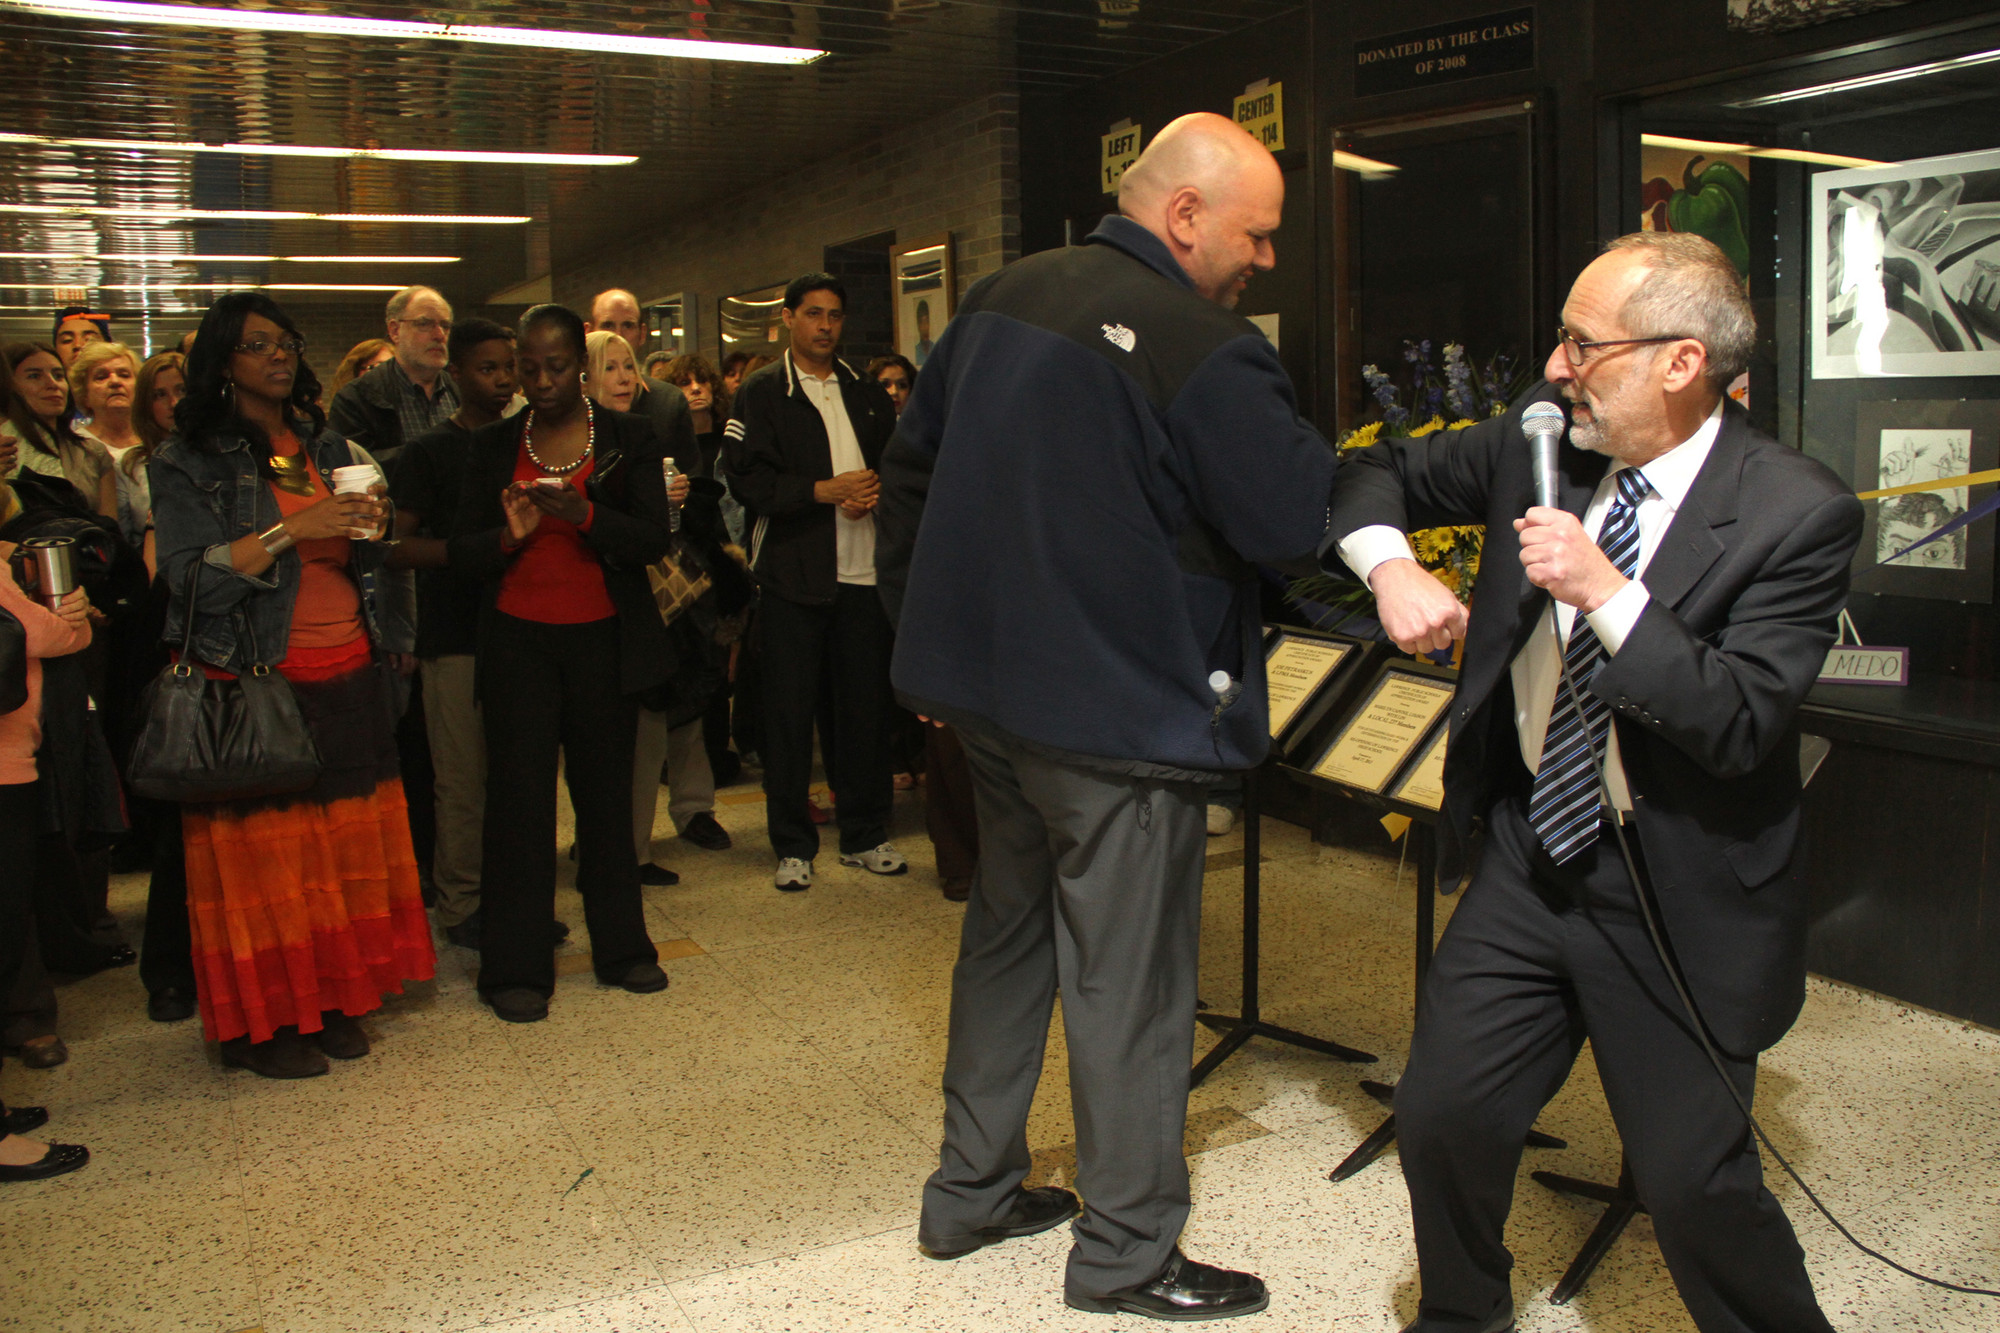 Gary Schall greets Facilities Director Chris Milano with an elbow bump at the ribbon-cutting.